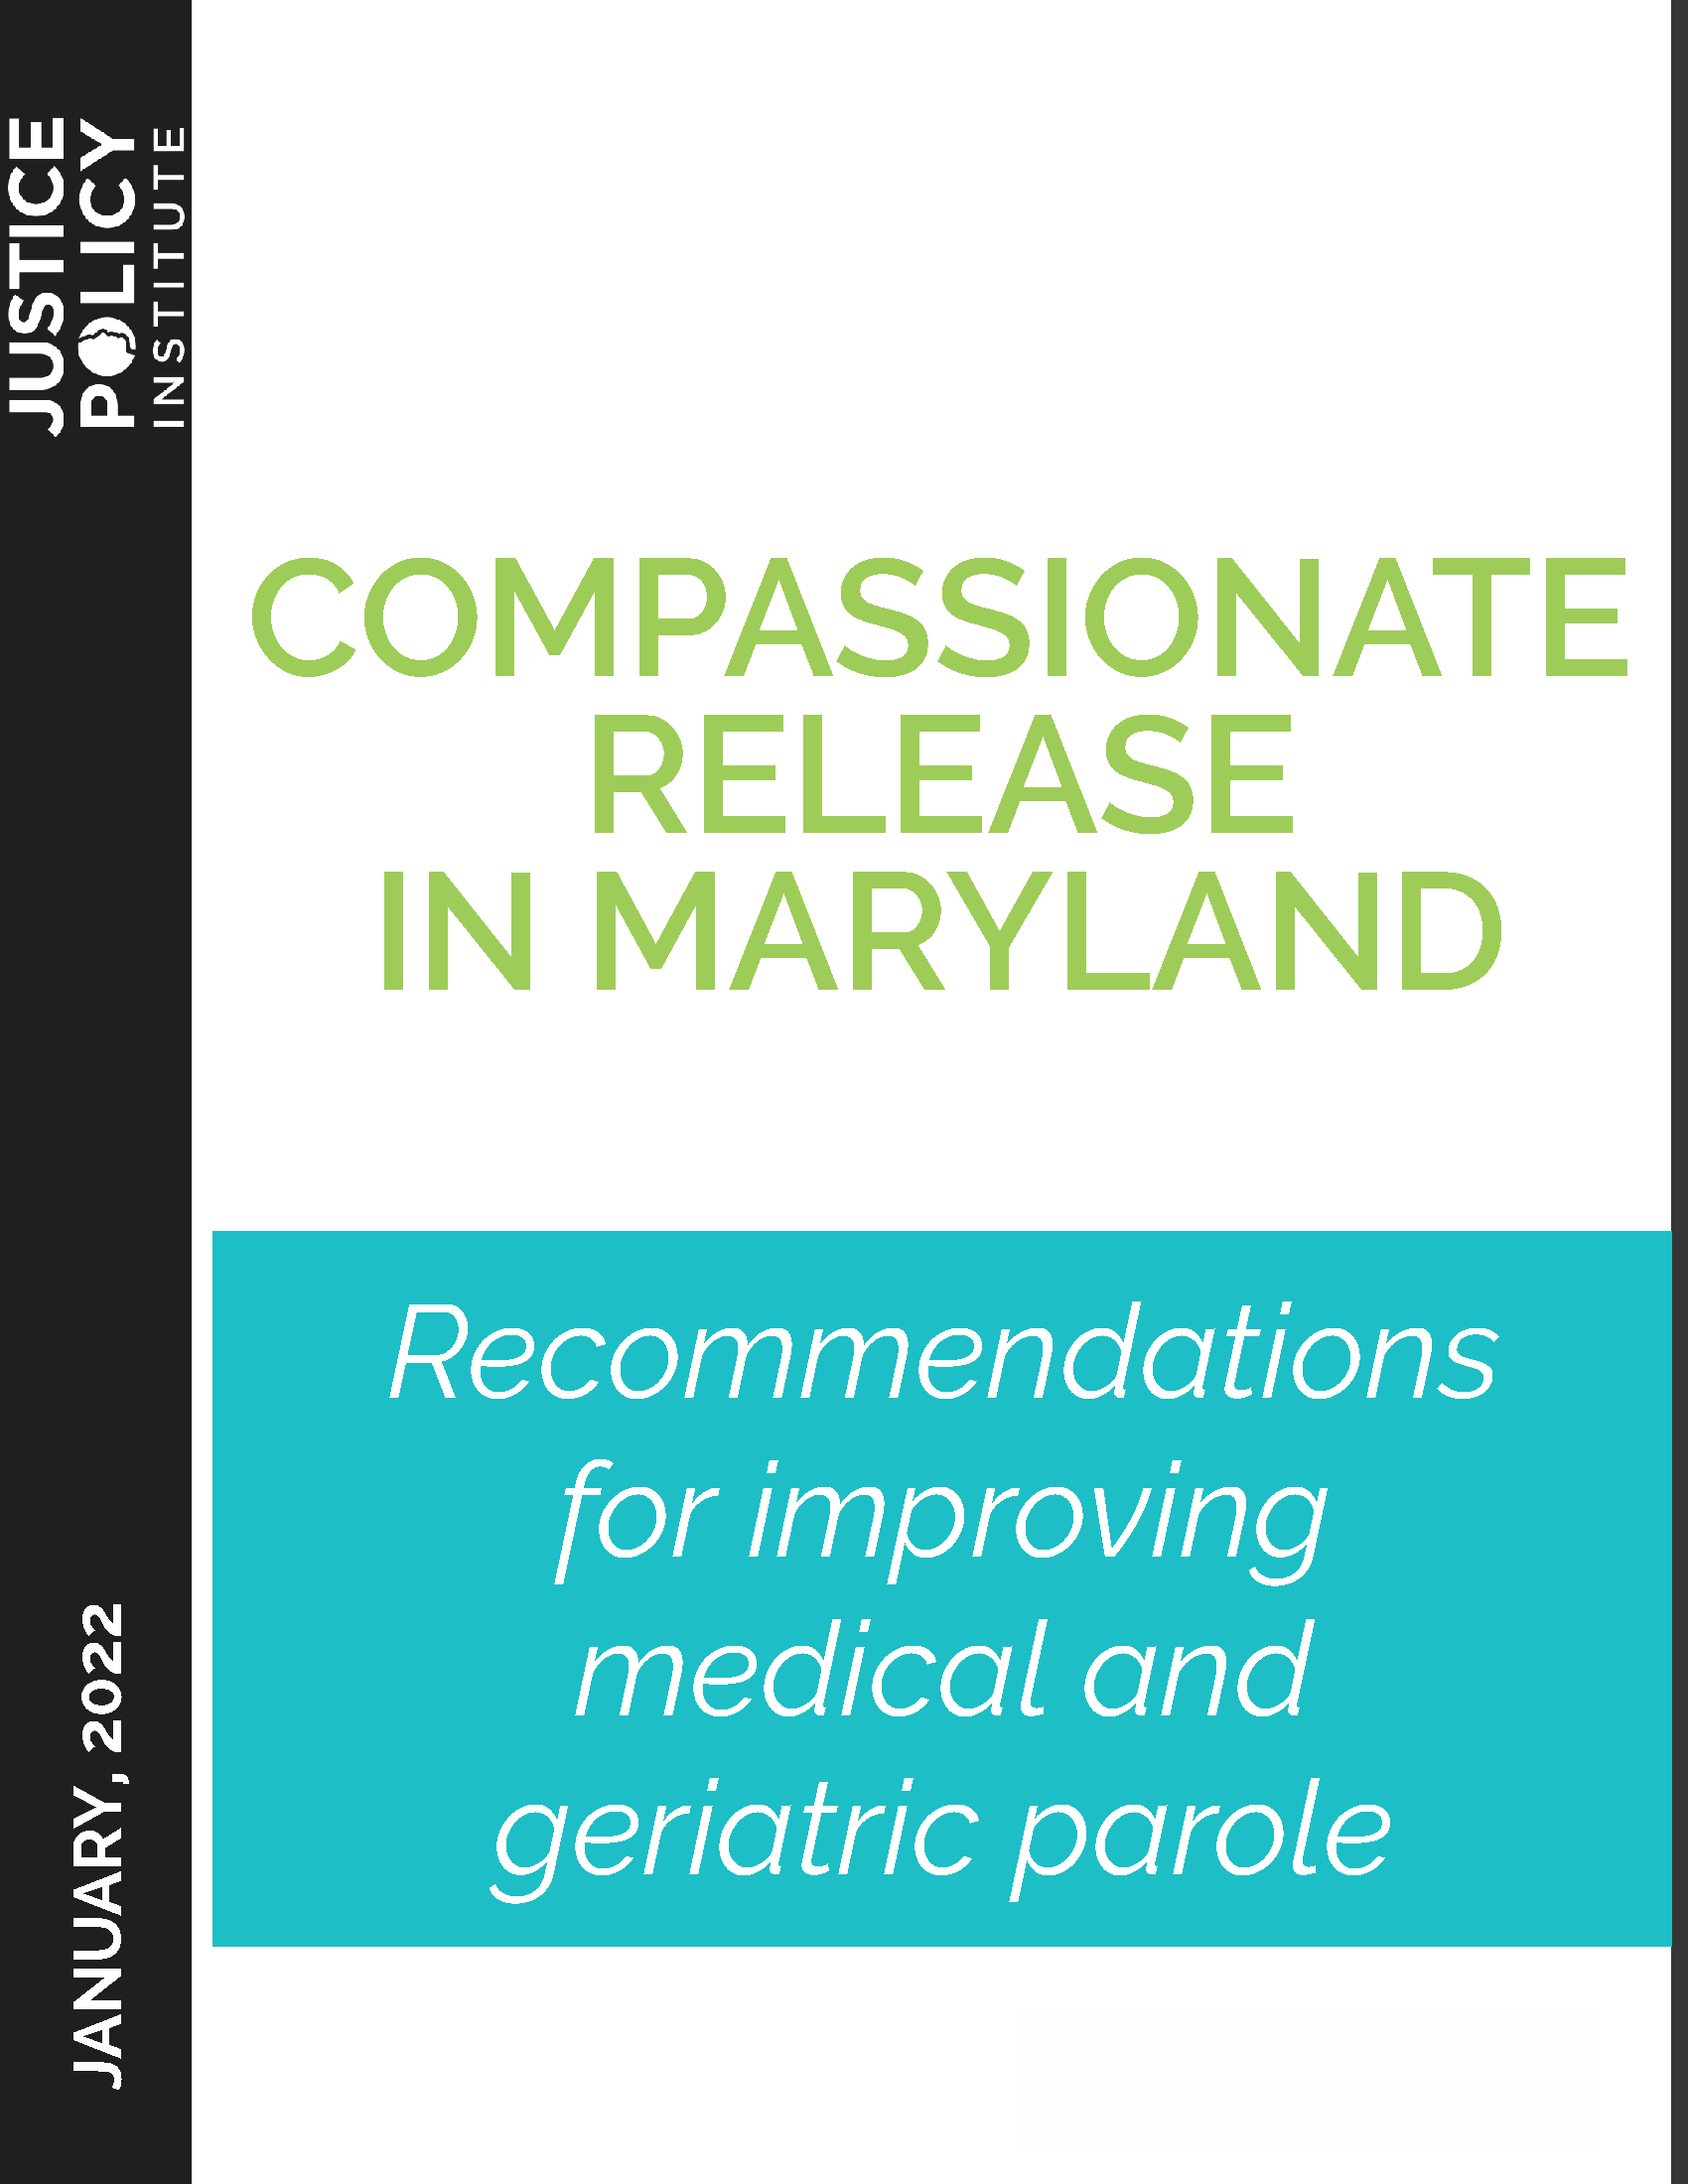 Compassionate Release in Maryland Medical and Geriatric Parole